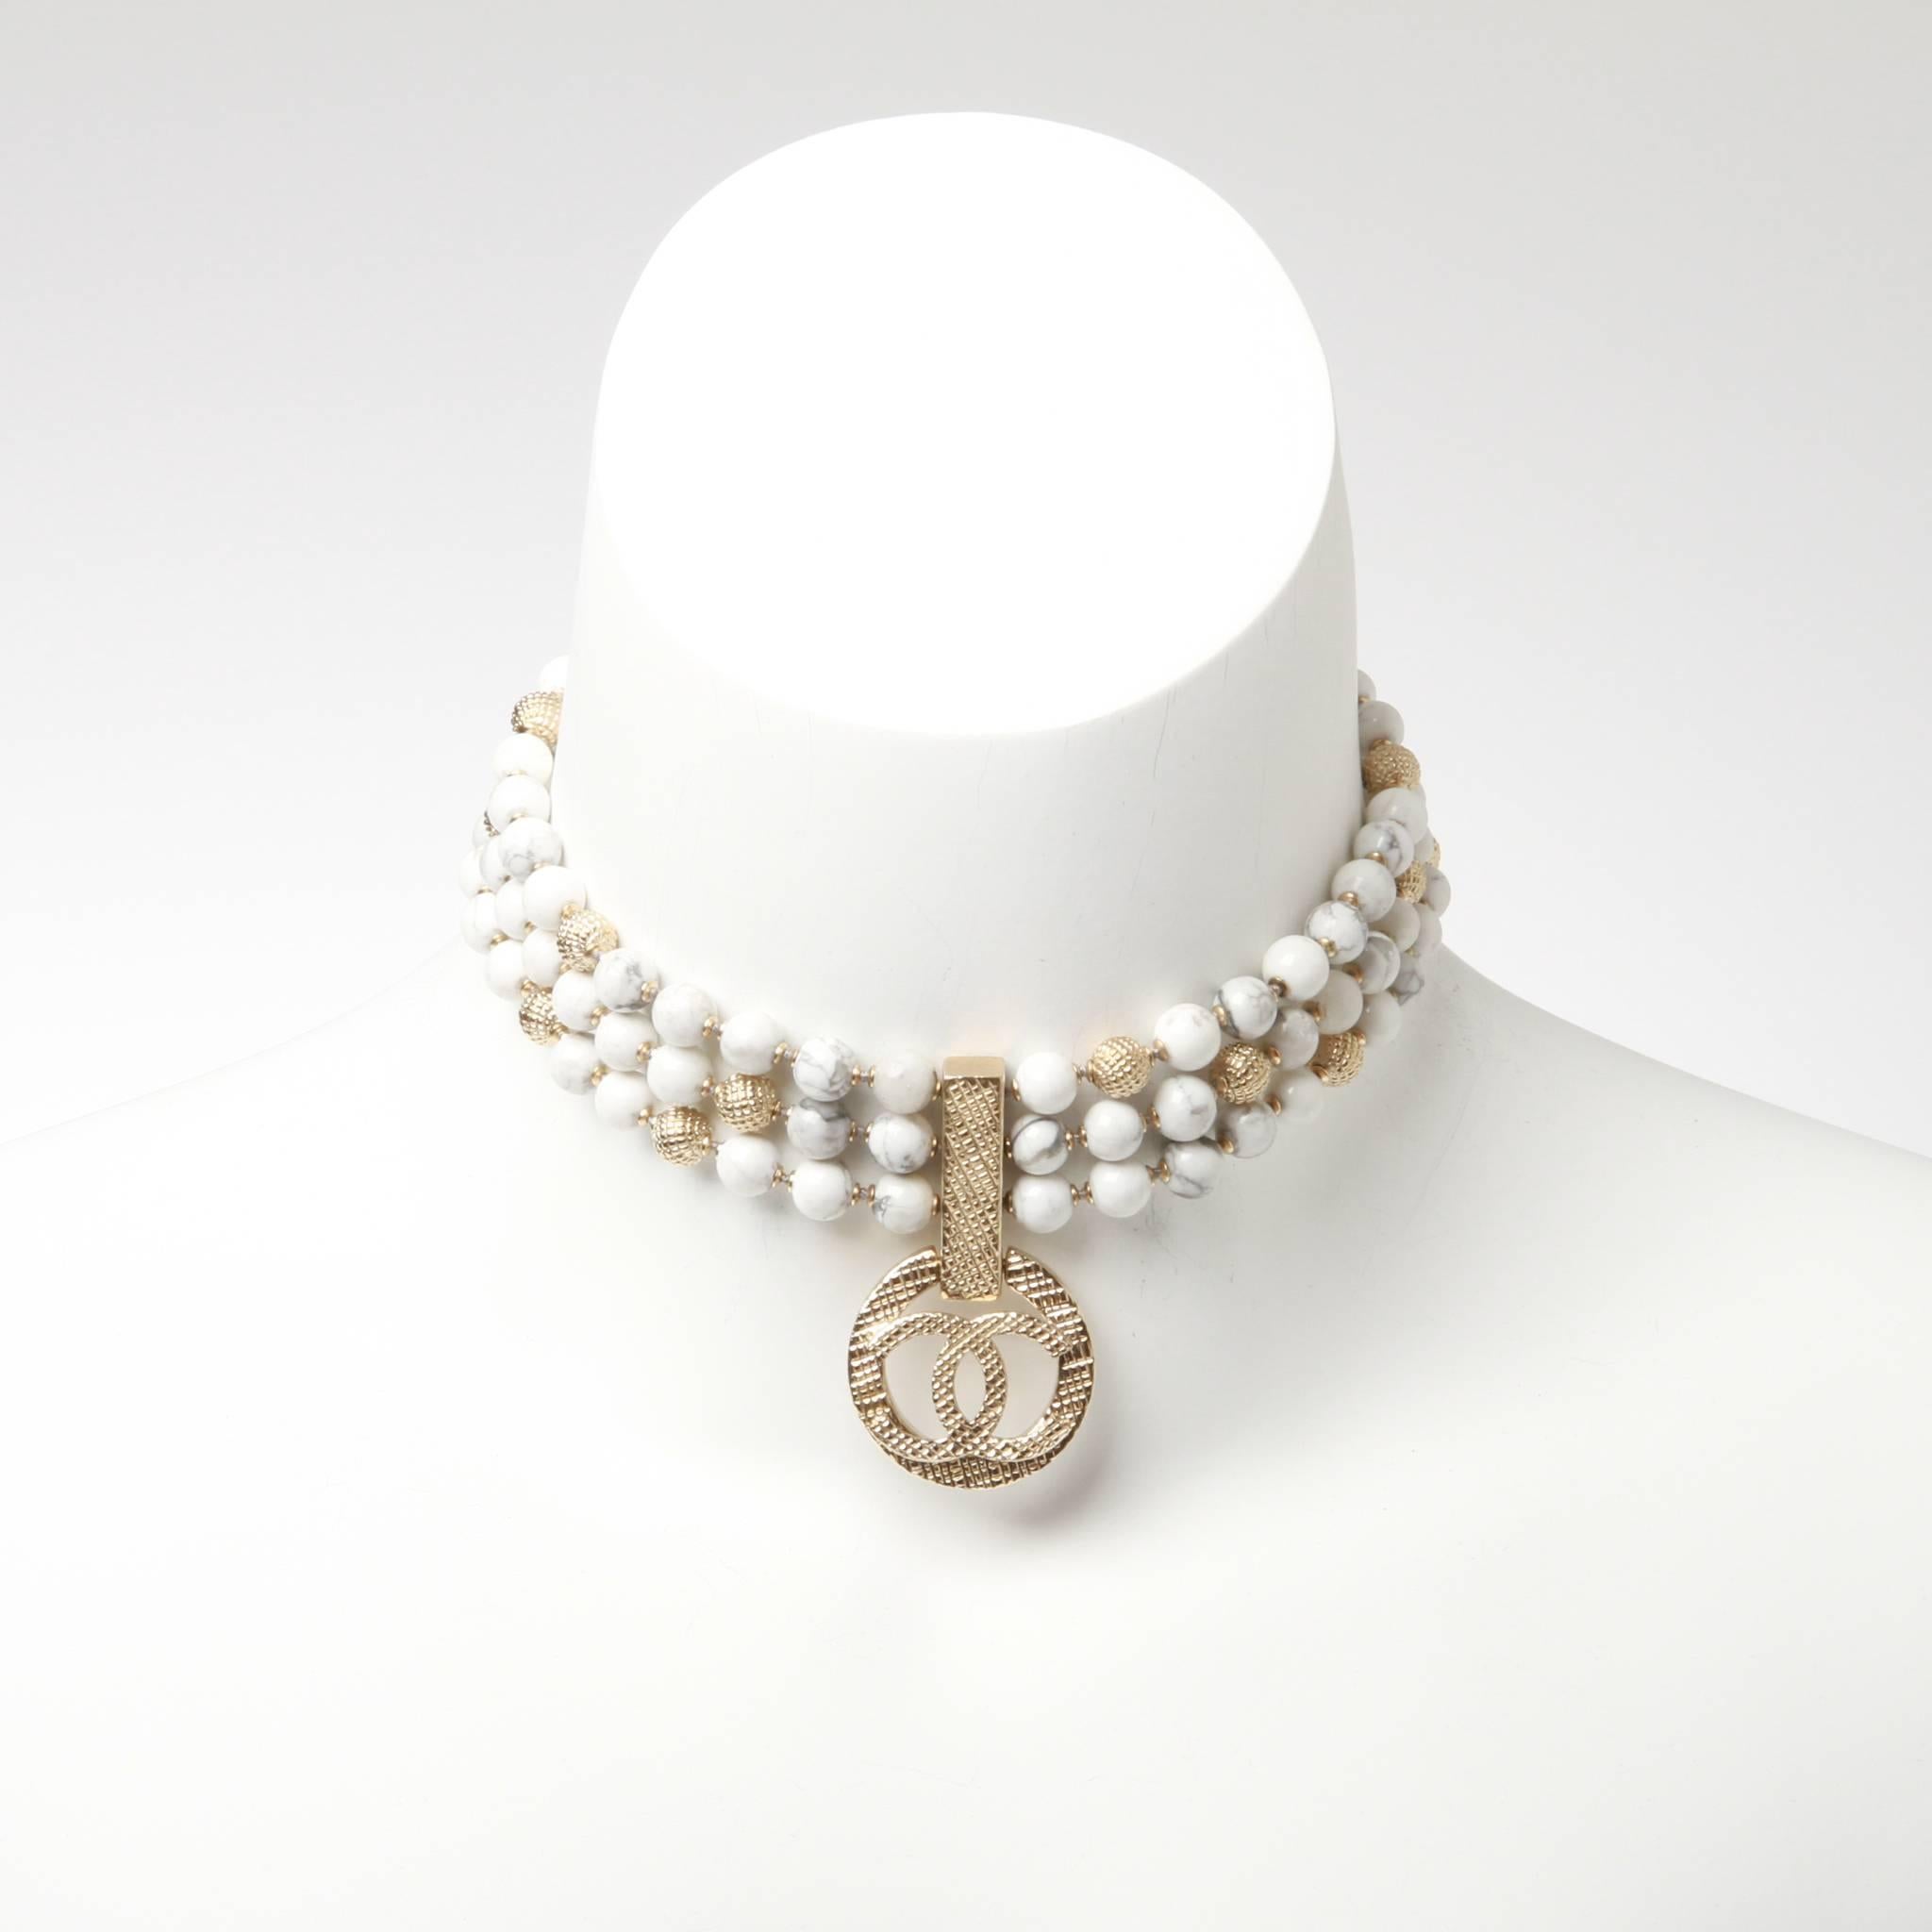 Chanel choker formed of three-strands strung with marbled and metal beads with a central CC pendant in very pale gold tone crosshatched metal. 

Stamped B16 A

Comes with box